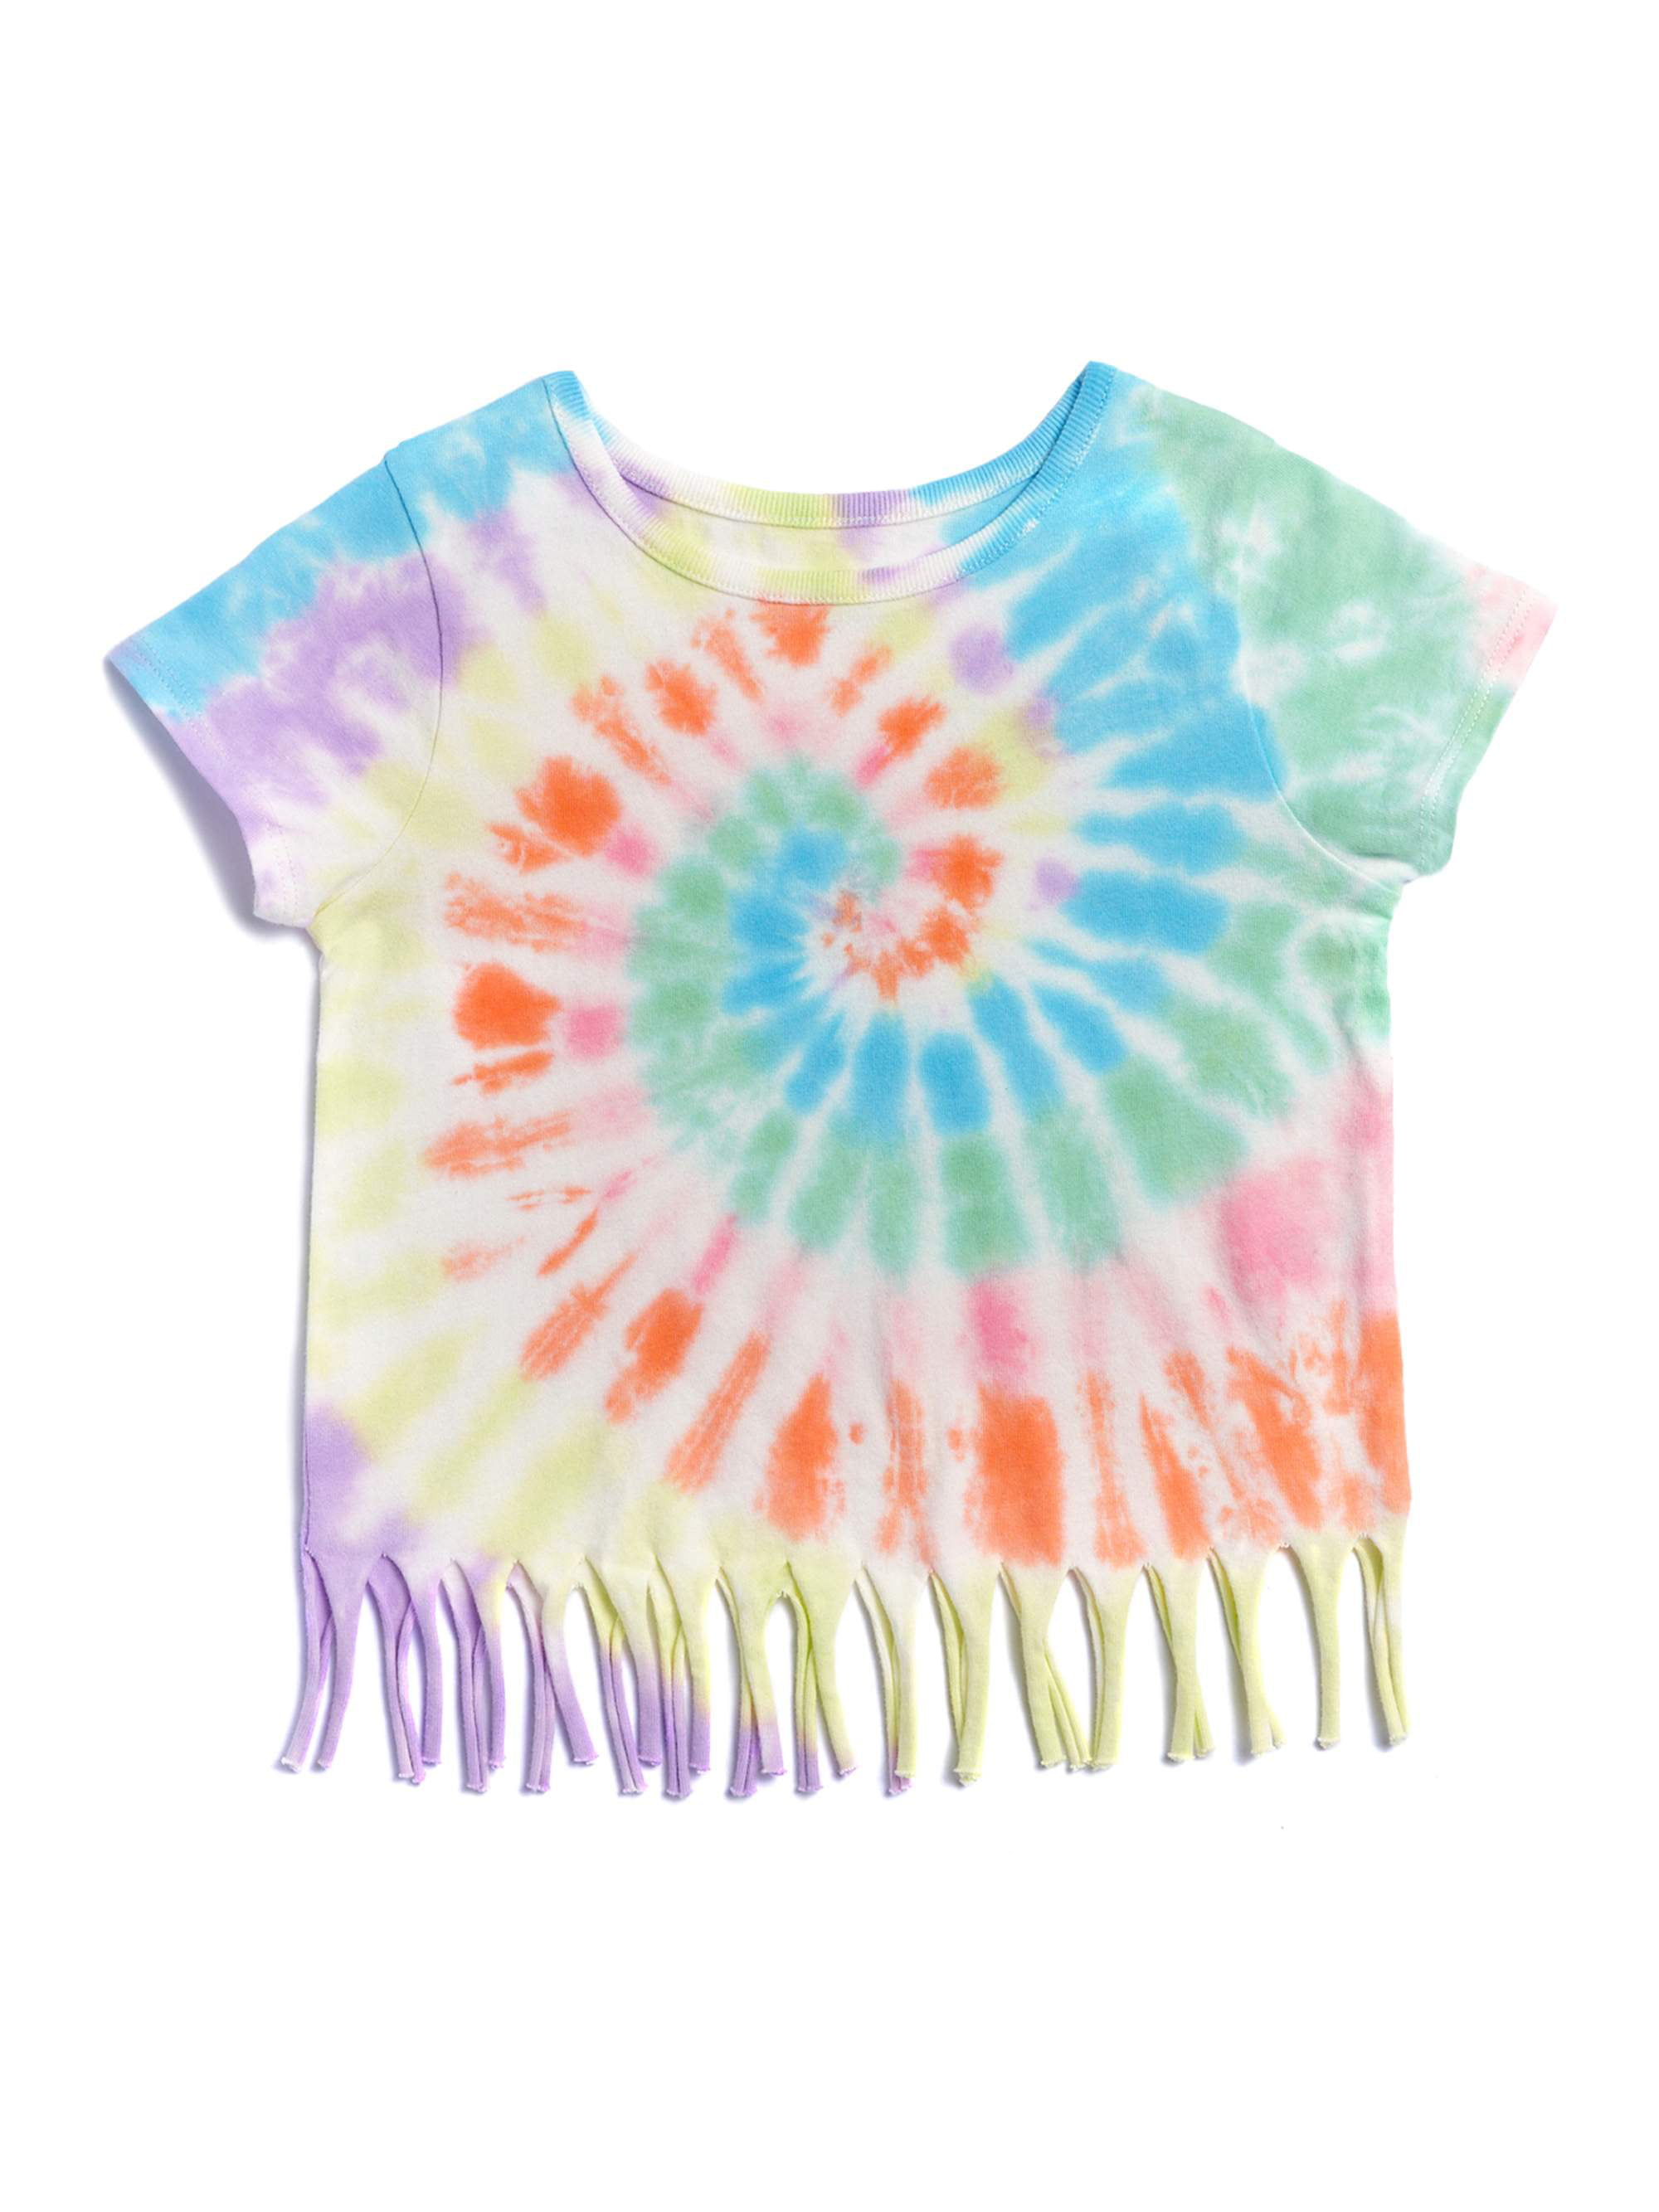 uni- sex tiedye long sleeve top tiedye ethical fashion little bird light weight cotton tee multi coloured t-shirt recycled cotton